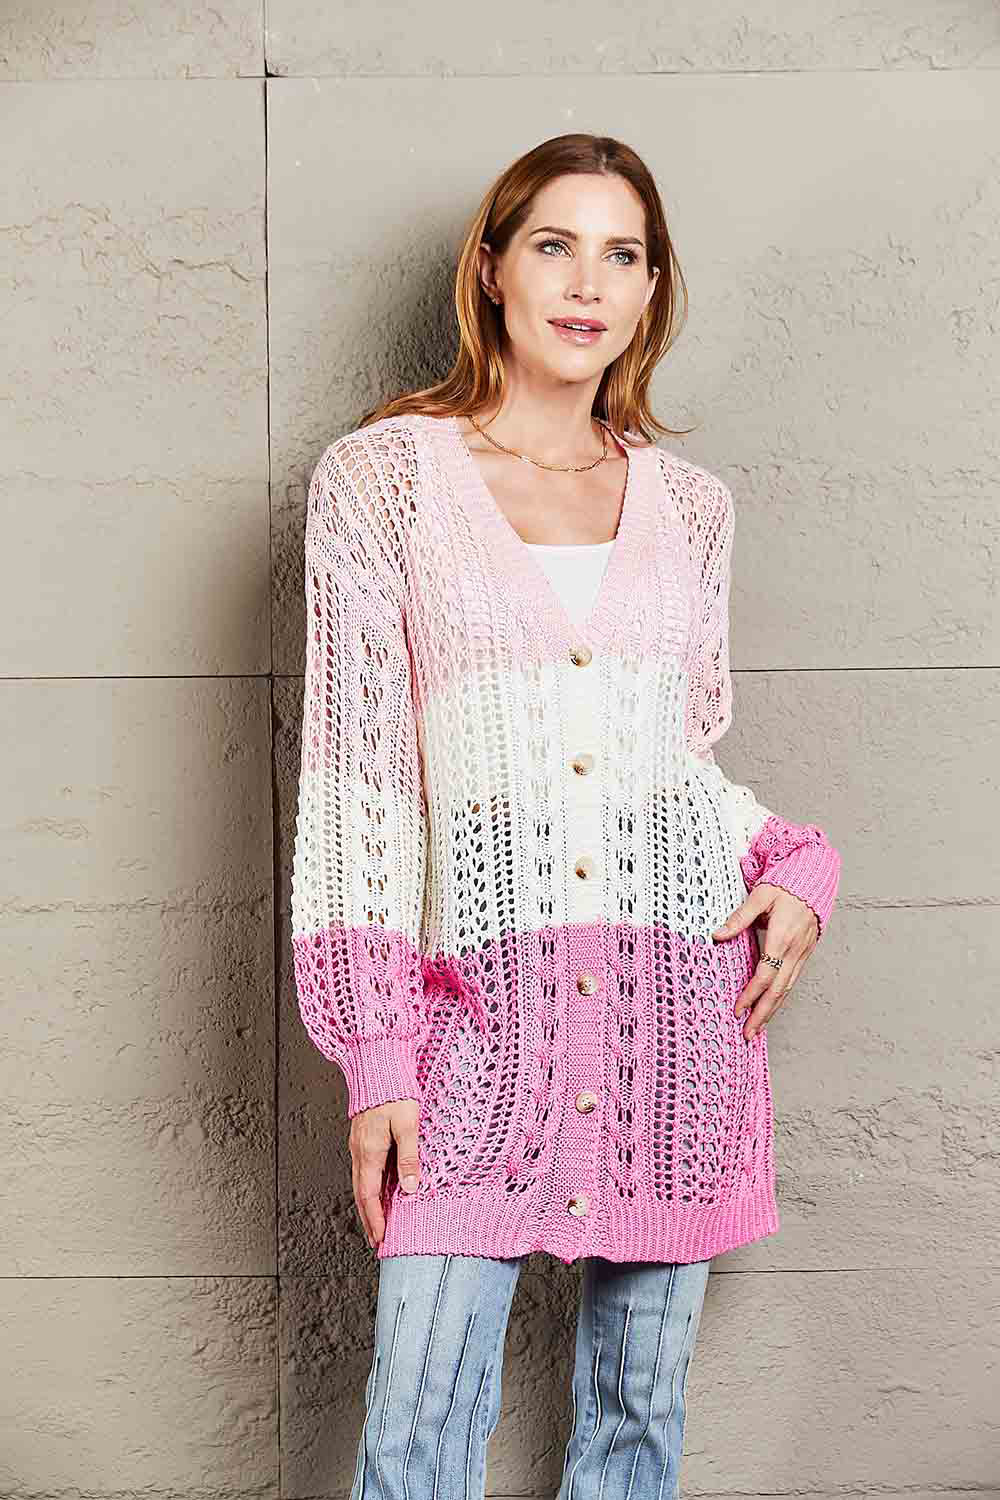 Openwork Ribbed Cuff Longline Cardigan - Pink / S - Women’s Clothing & Accessories - Shirts & Tops - 19 - 2024